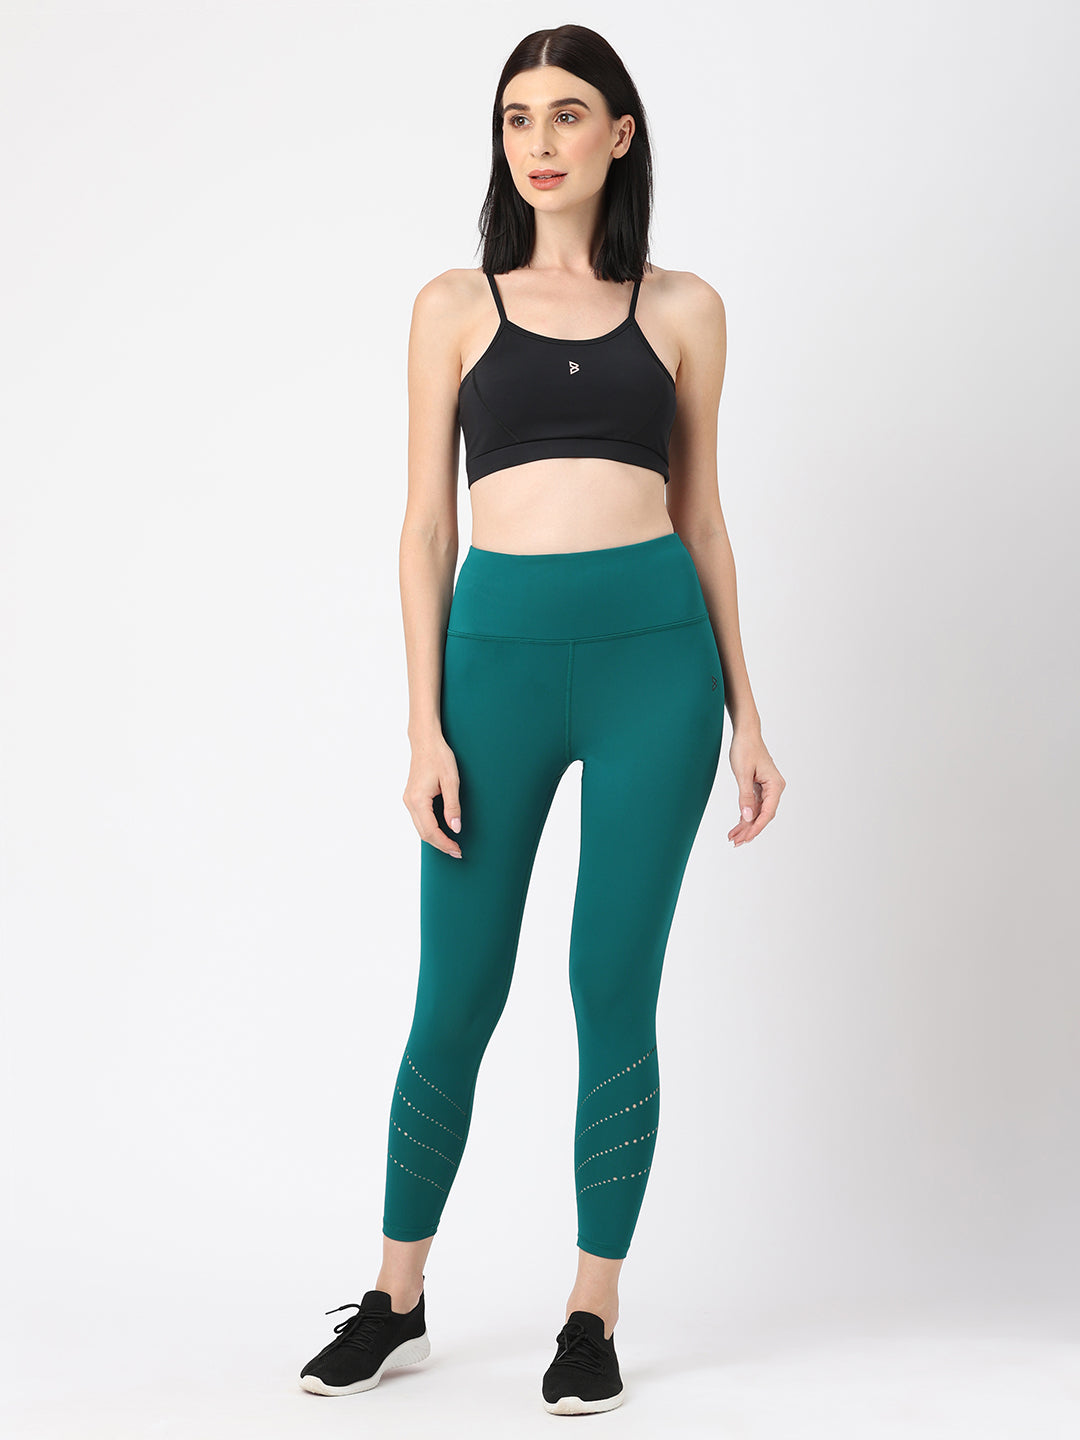 5 Kinds of Workout Clothing I Seriously Do Not Understand - Agent Athletica